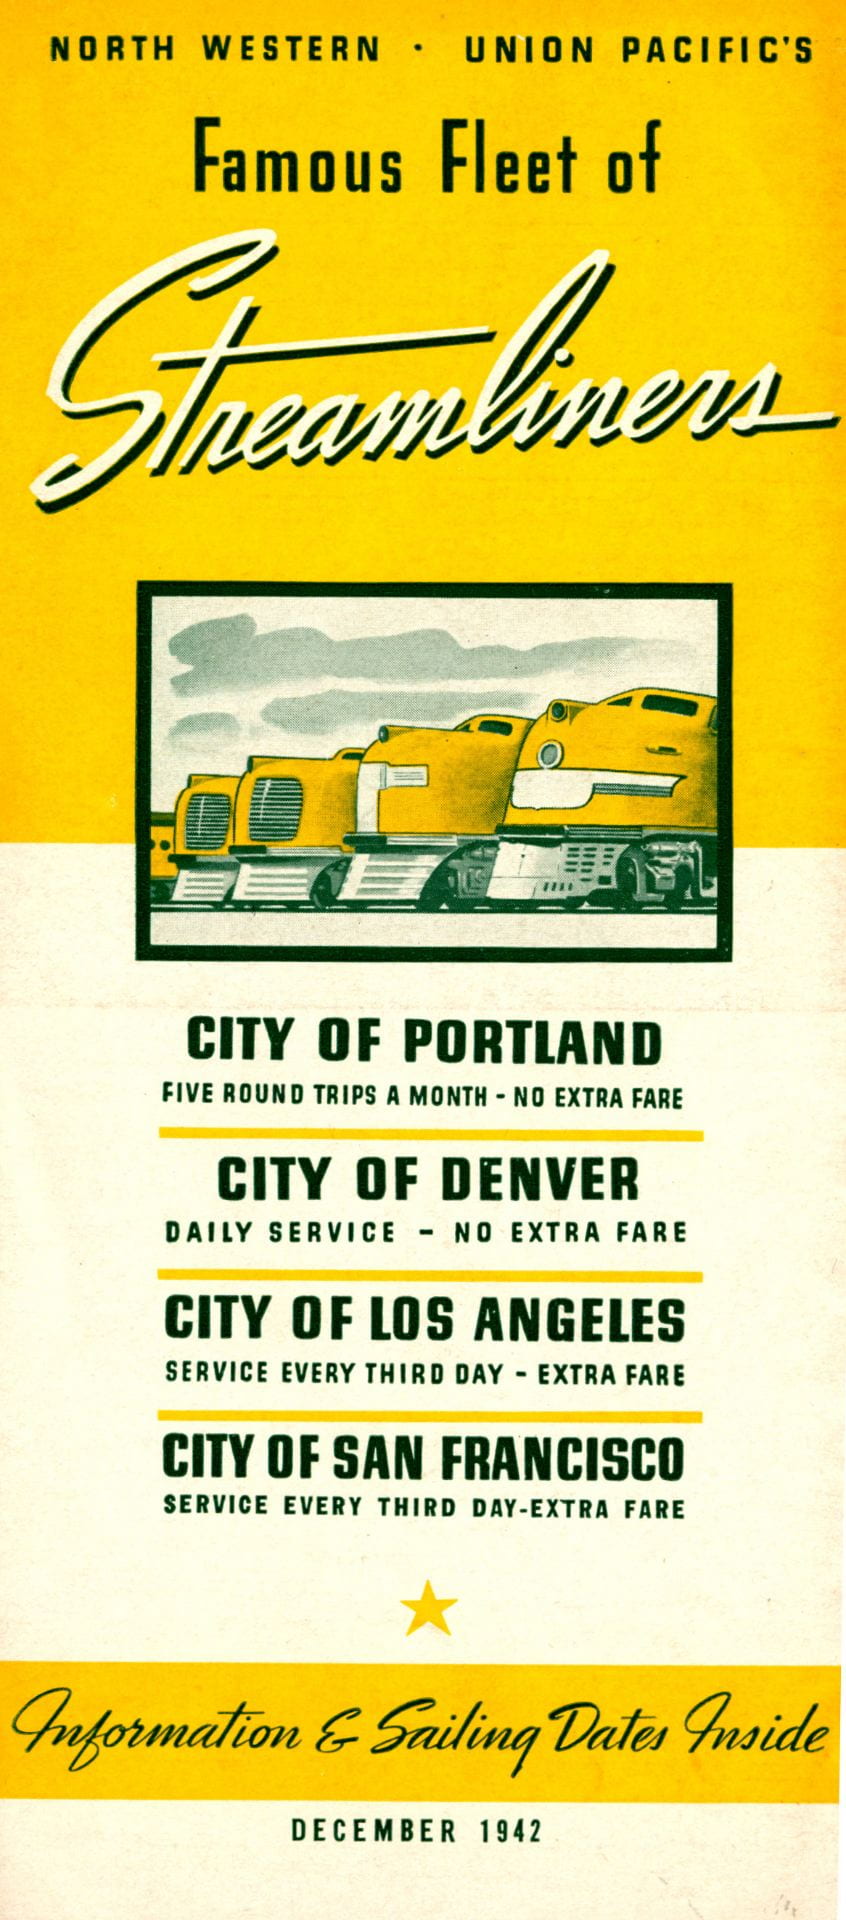 Employee Timetable 1976 book No 1 March 15 VTG Union Pacific 